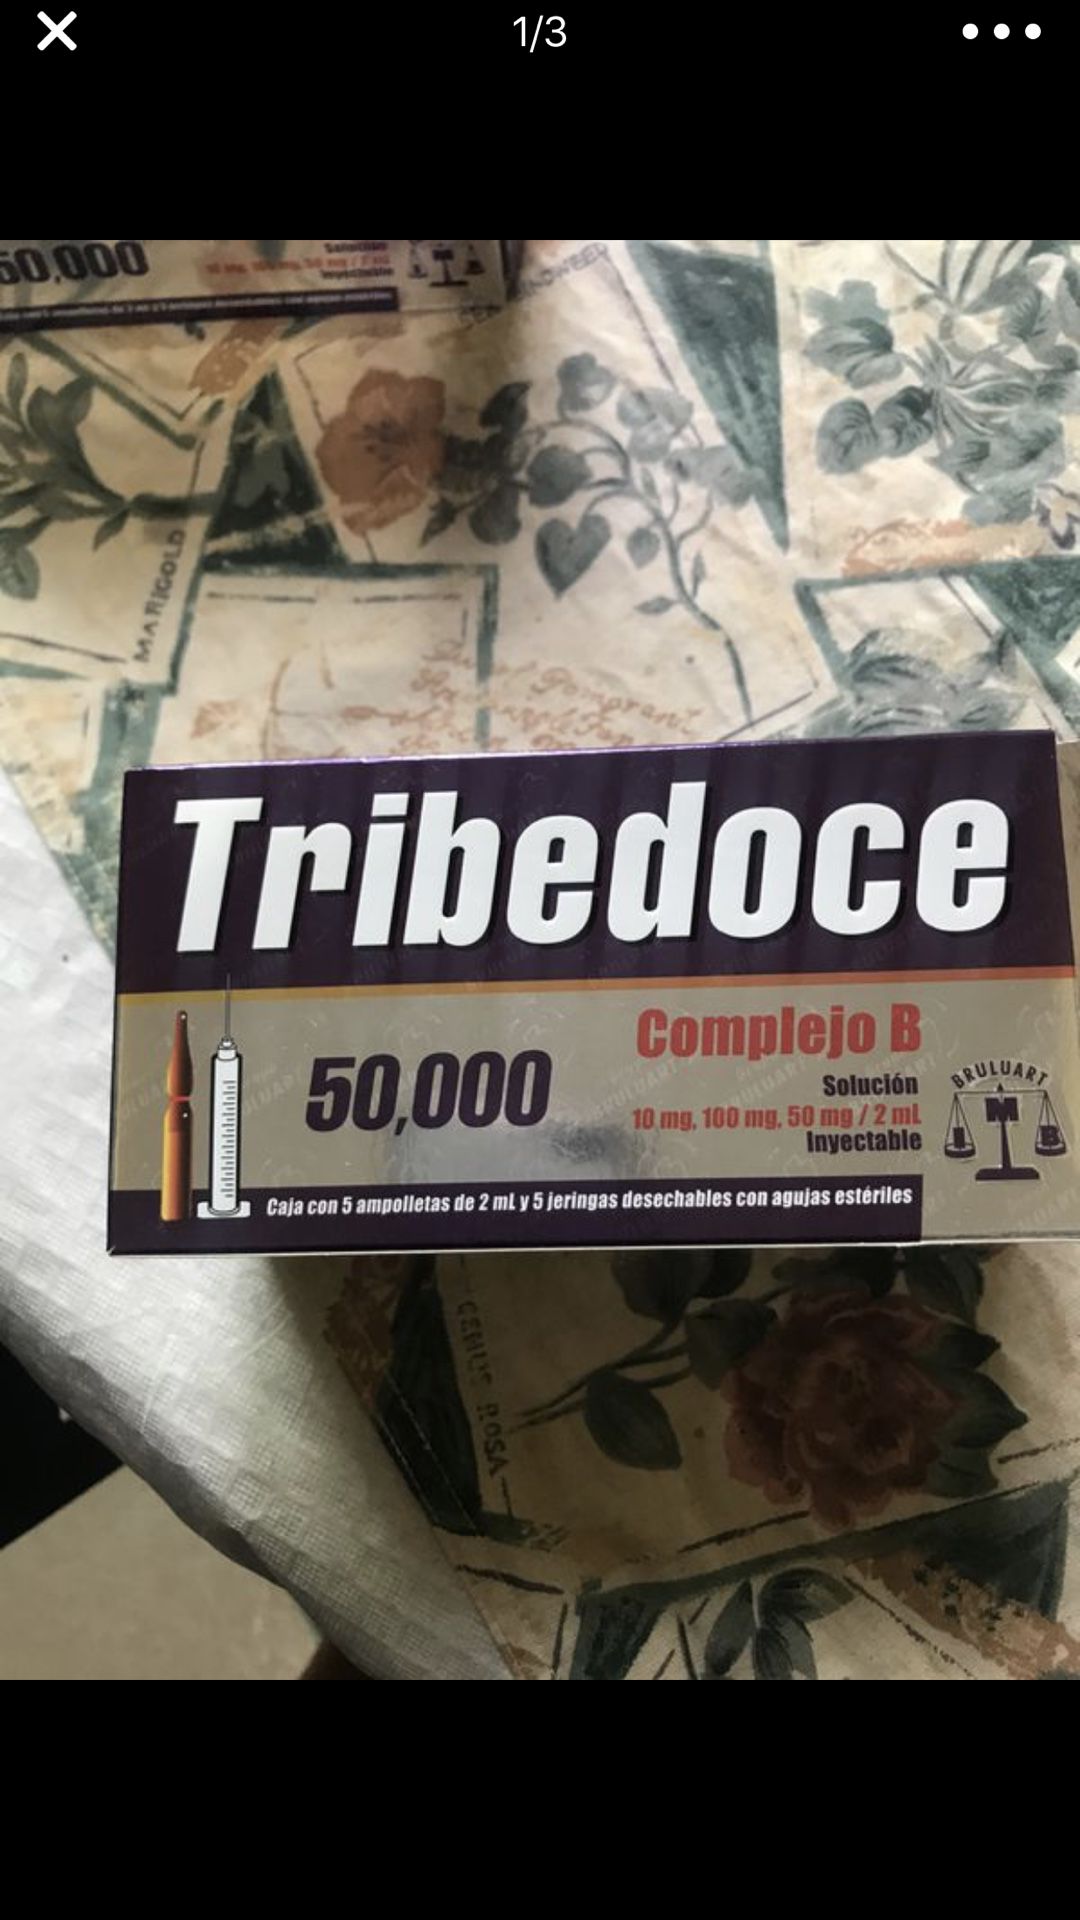 Tribedoce complejo B